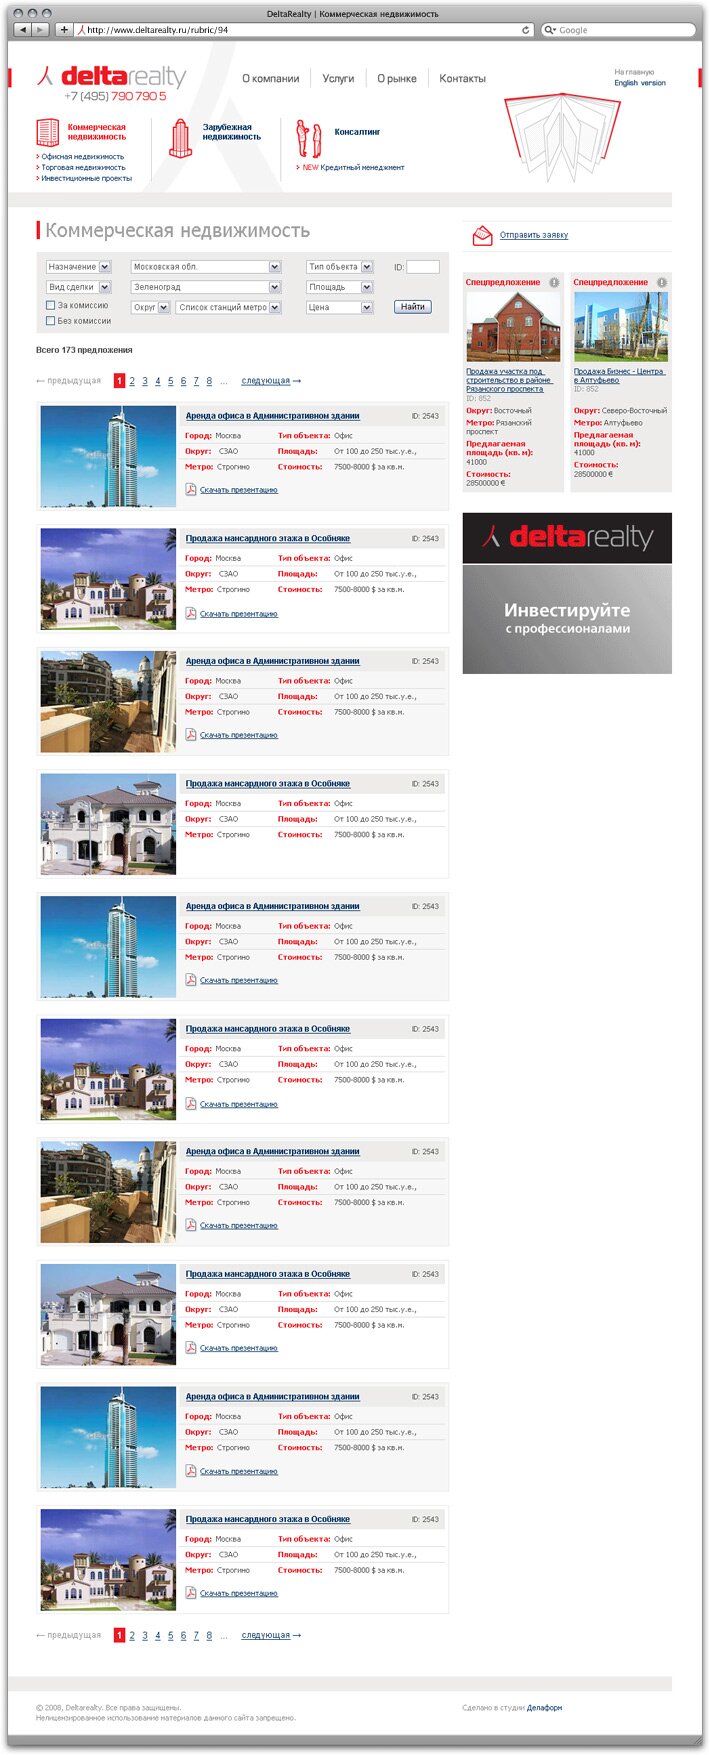     DeltaRealty